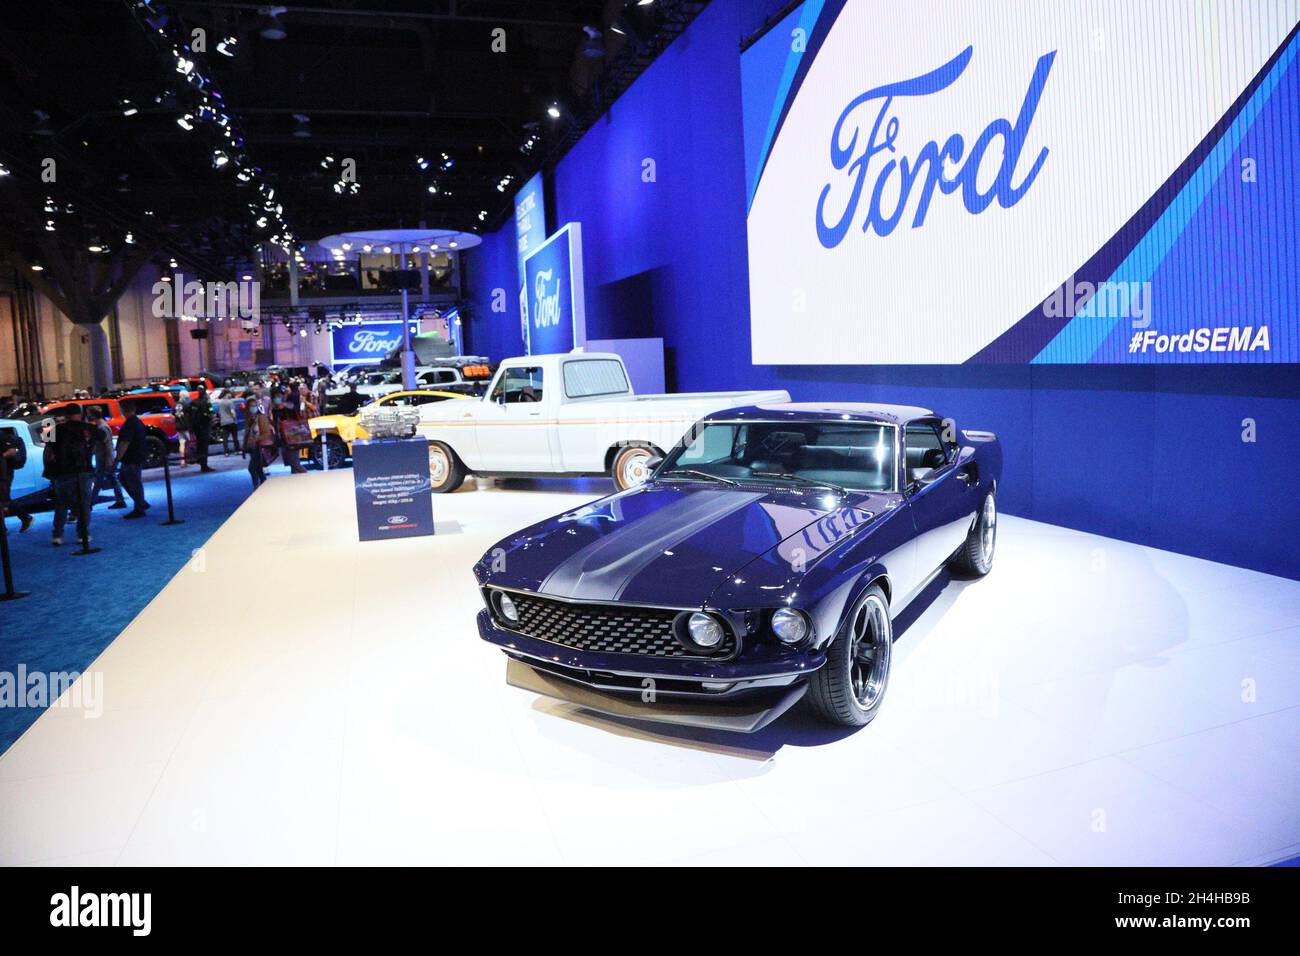 Las Vegas, NV, USA. 2nd Nov, 2021. Keith Urban's restored 1969 Ford Mustang Fastback at a public appearance for SEMA Show 2021 - TUE, Las Vegas Convention Center, Las Vegas, NV November 2, 2021. Credit: JA/Everett Collection/Alamy Live News Stock Photo